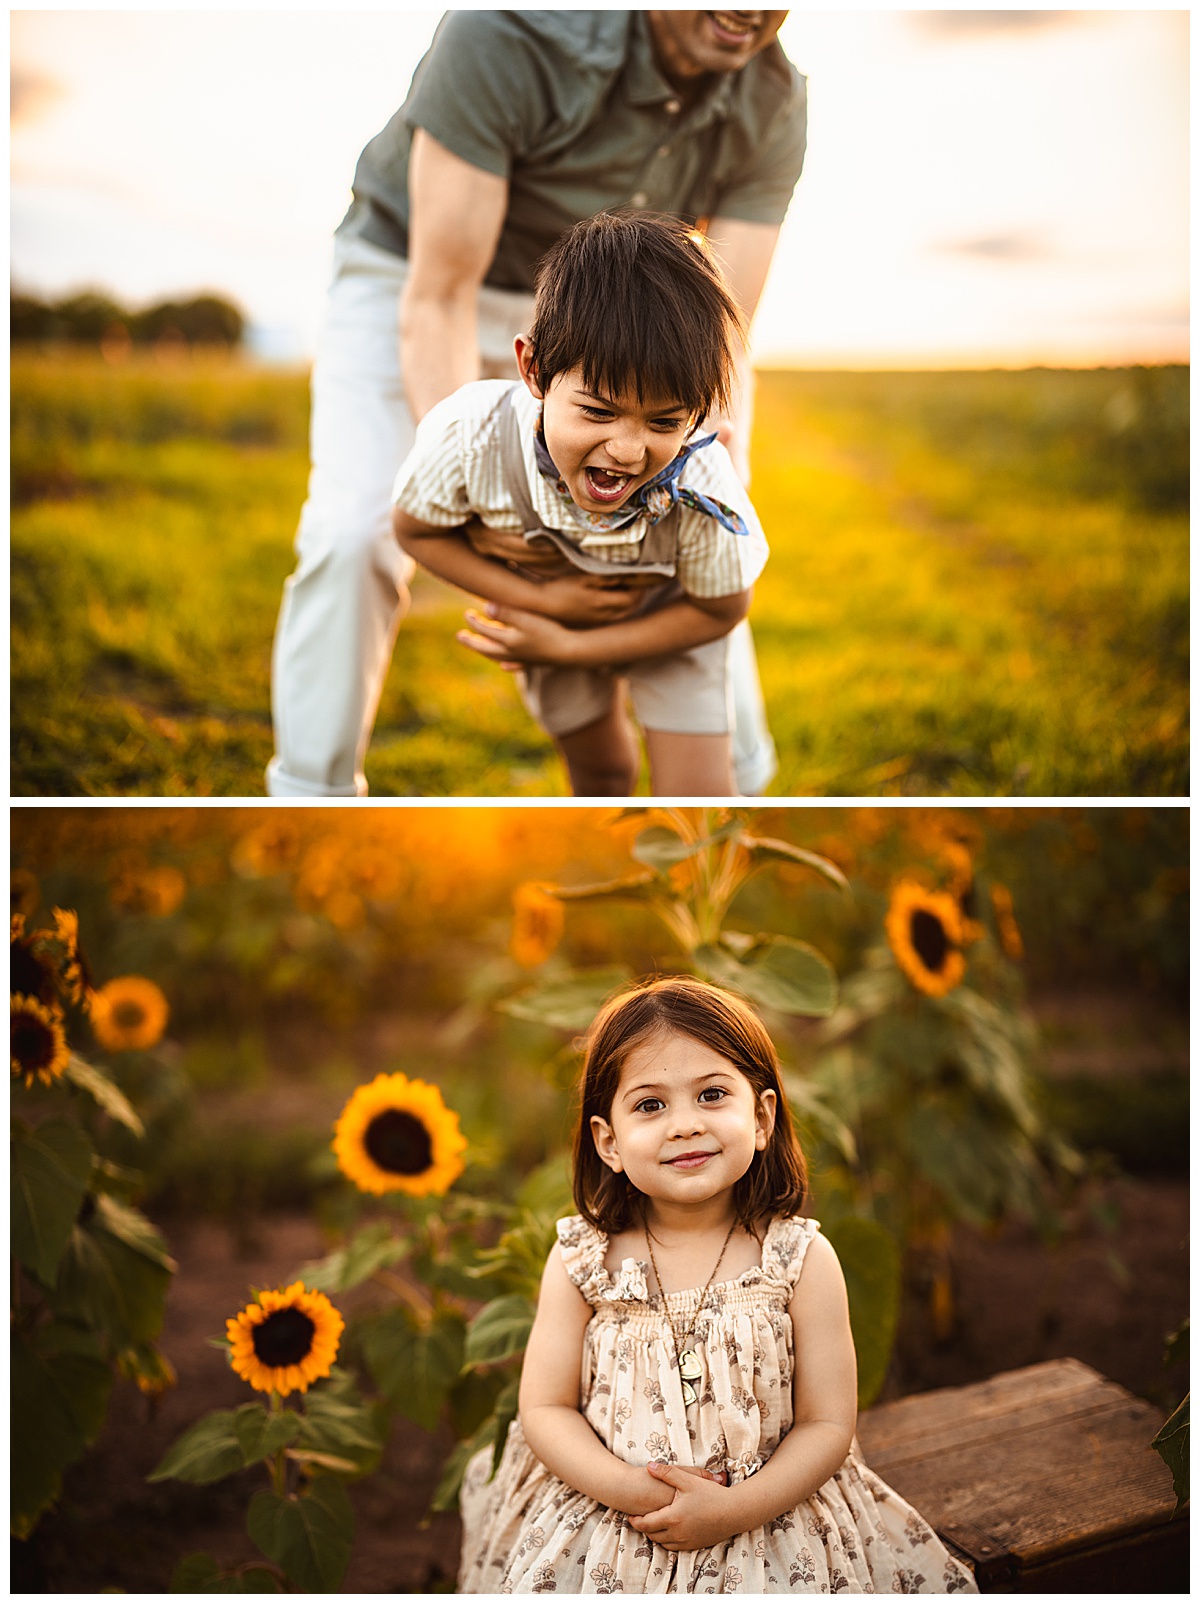 Kids play in the flower fields for Norma Fayak Photography